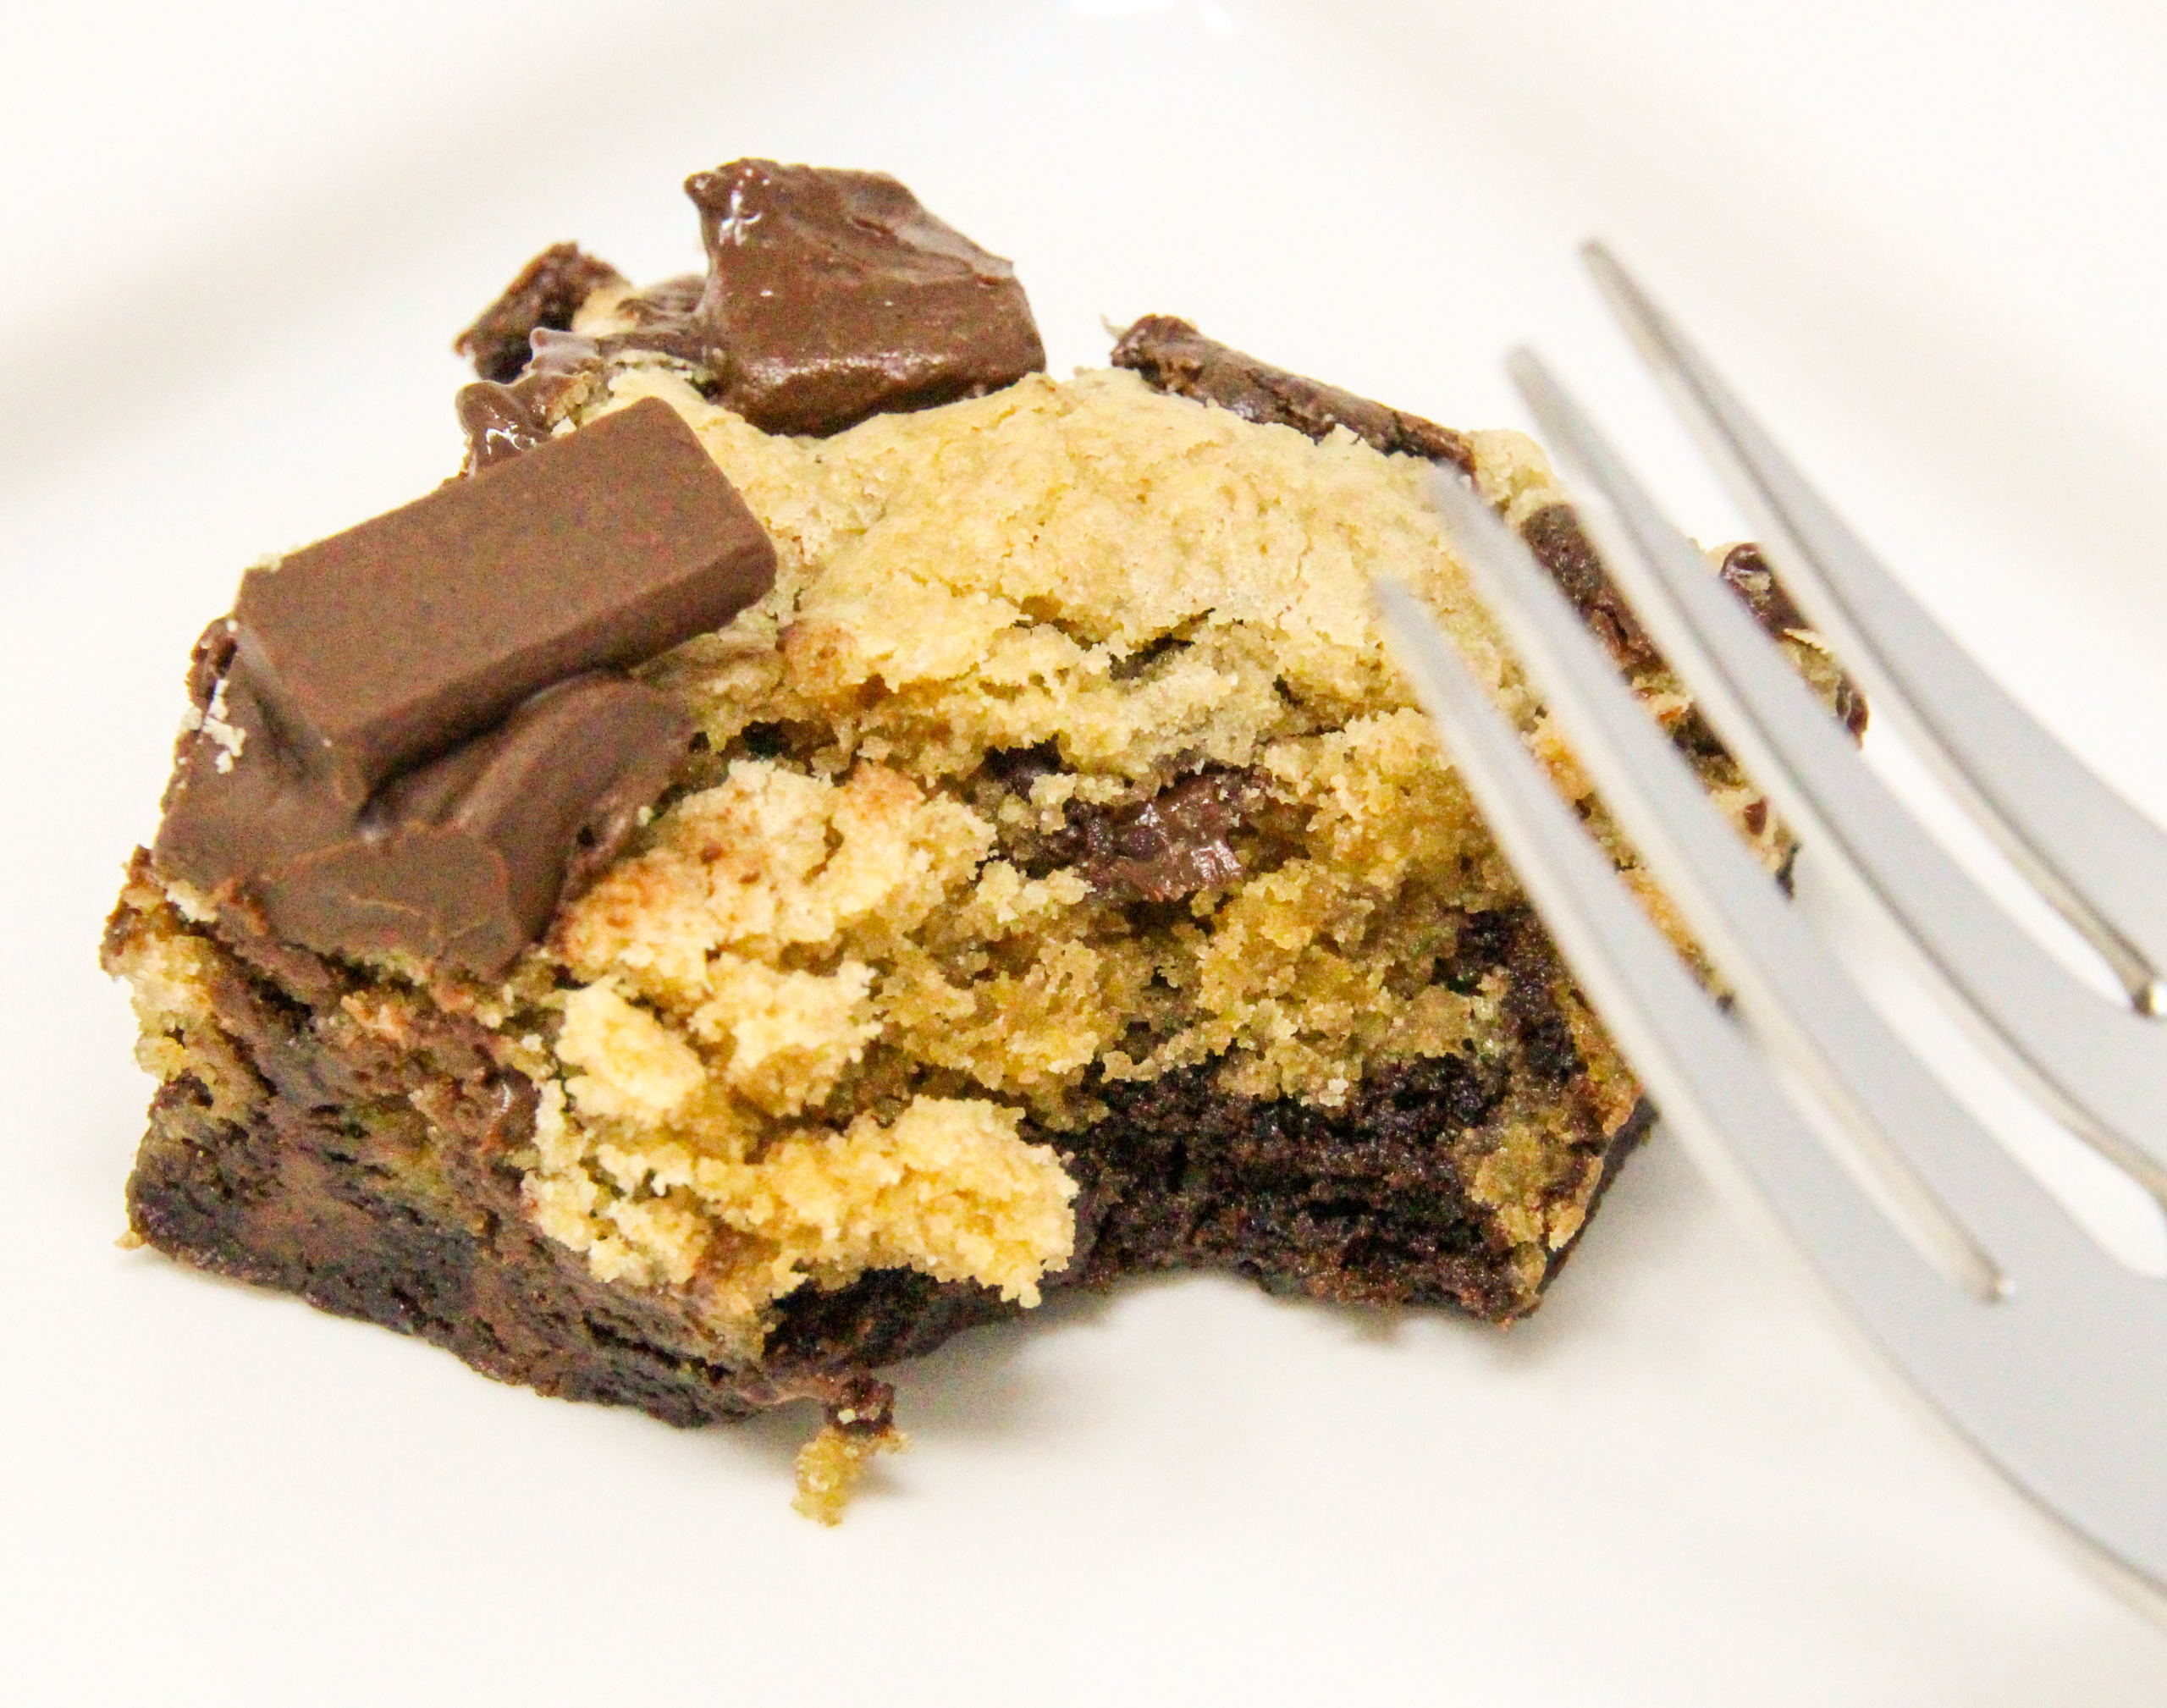 Brookies are a combination of rich, chocolatey brownies topped with chocolate chip cookie dough and garnished with dark chocolate chunks. Pure yumminess in one bar! Recipe created by Cinnamon & Sugar for Ellen Byron, author of A VERY WOODSY MURDER.